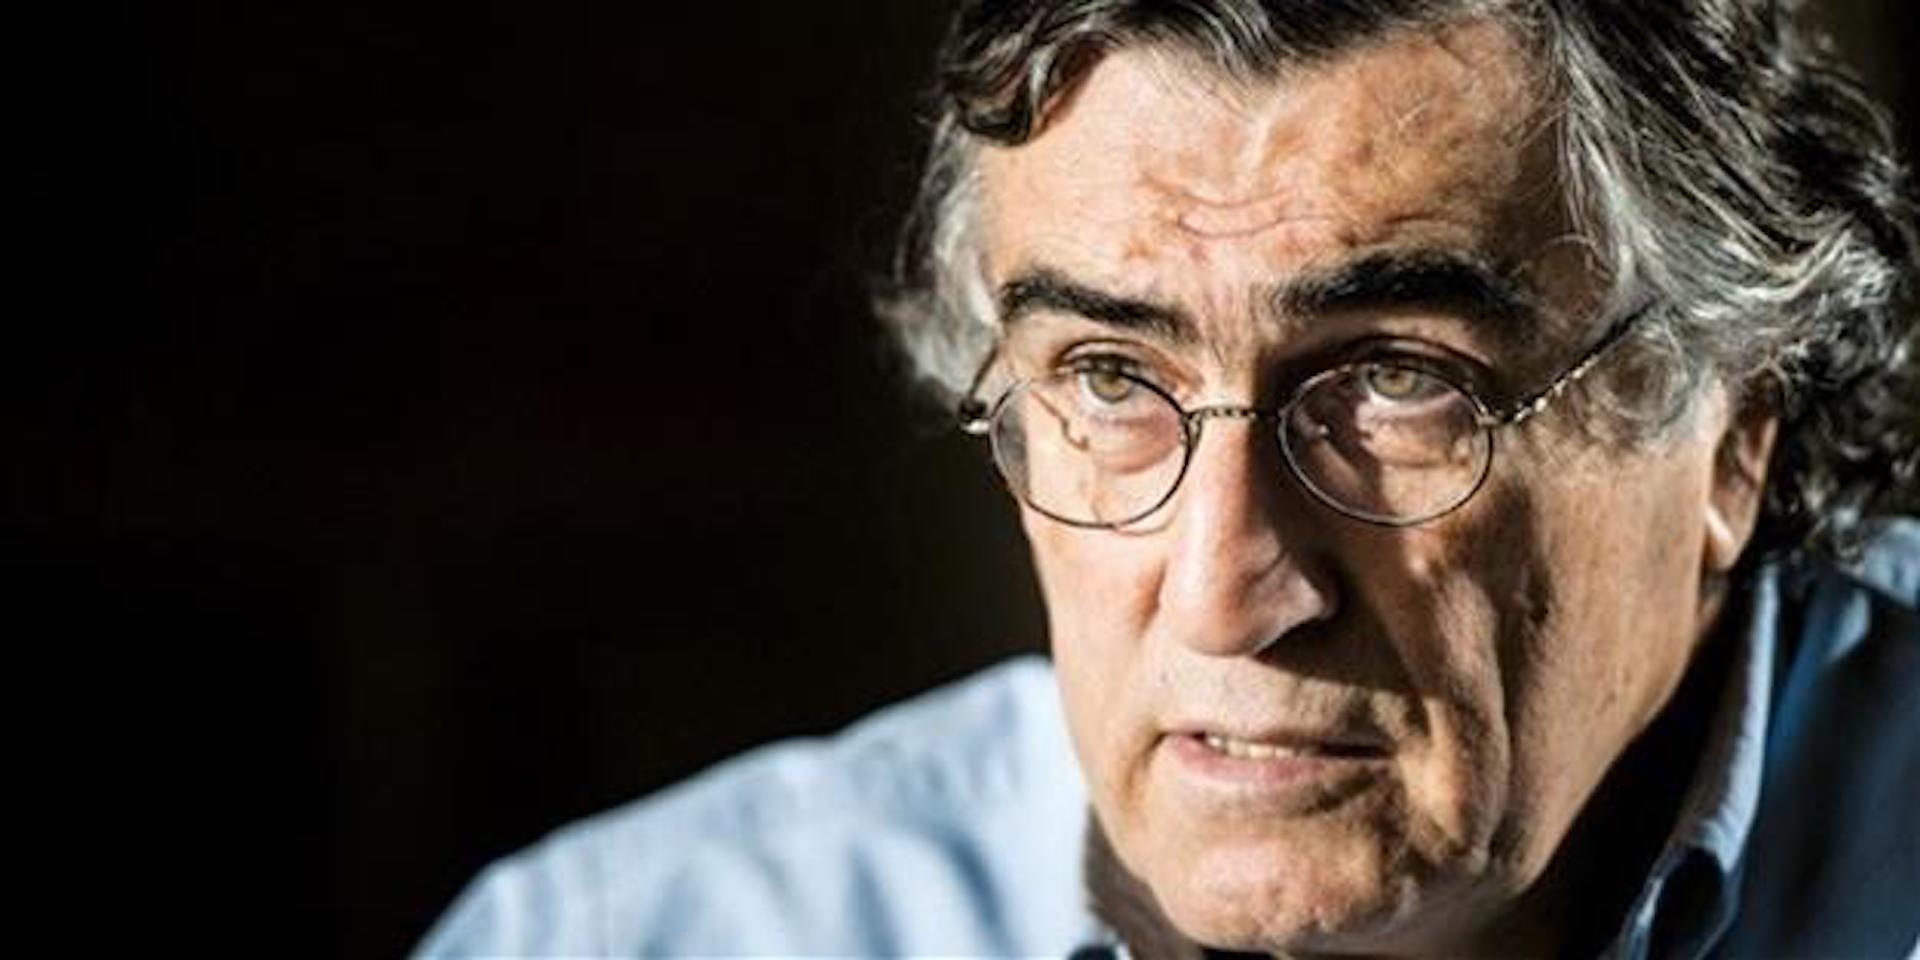 Turkish journalist Hasan Cemal sentenced to 15 months on charges of propagating terror